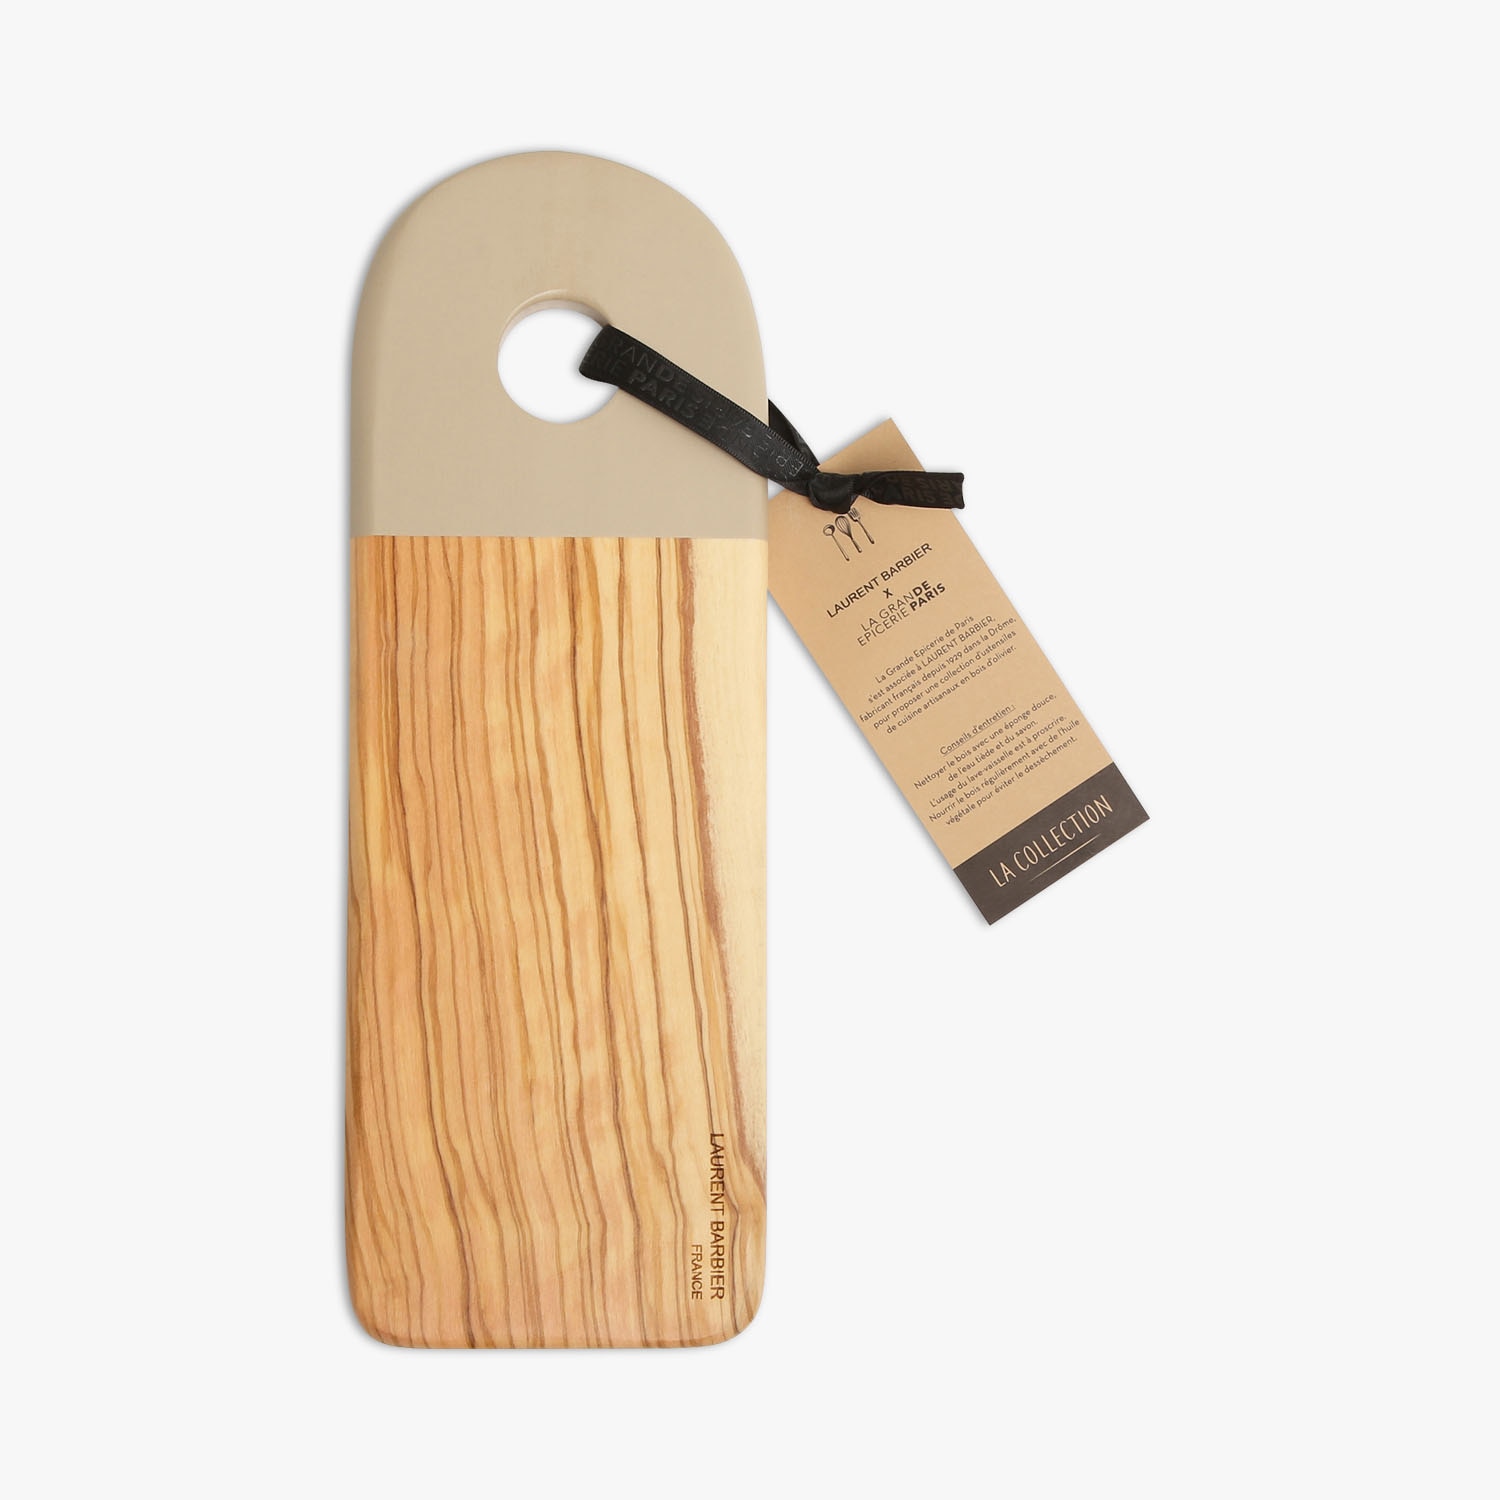 Camargue Olive Wood Chopping Board Clay